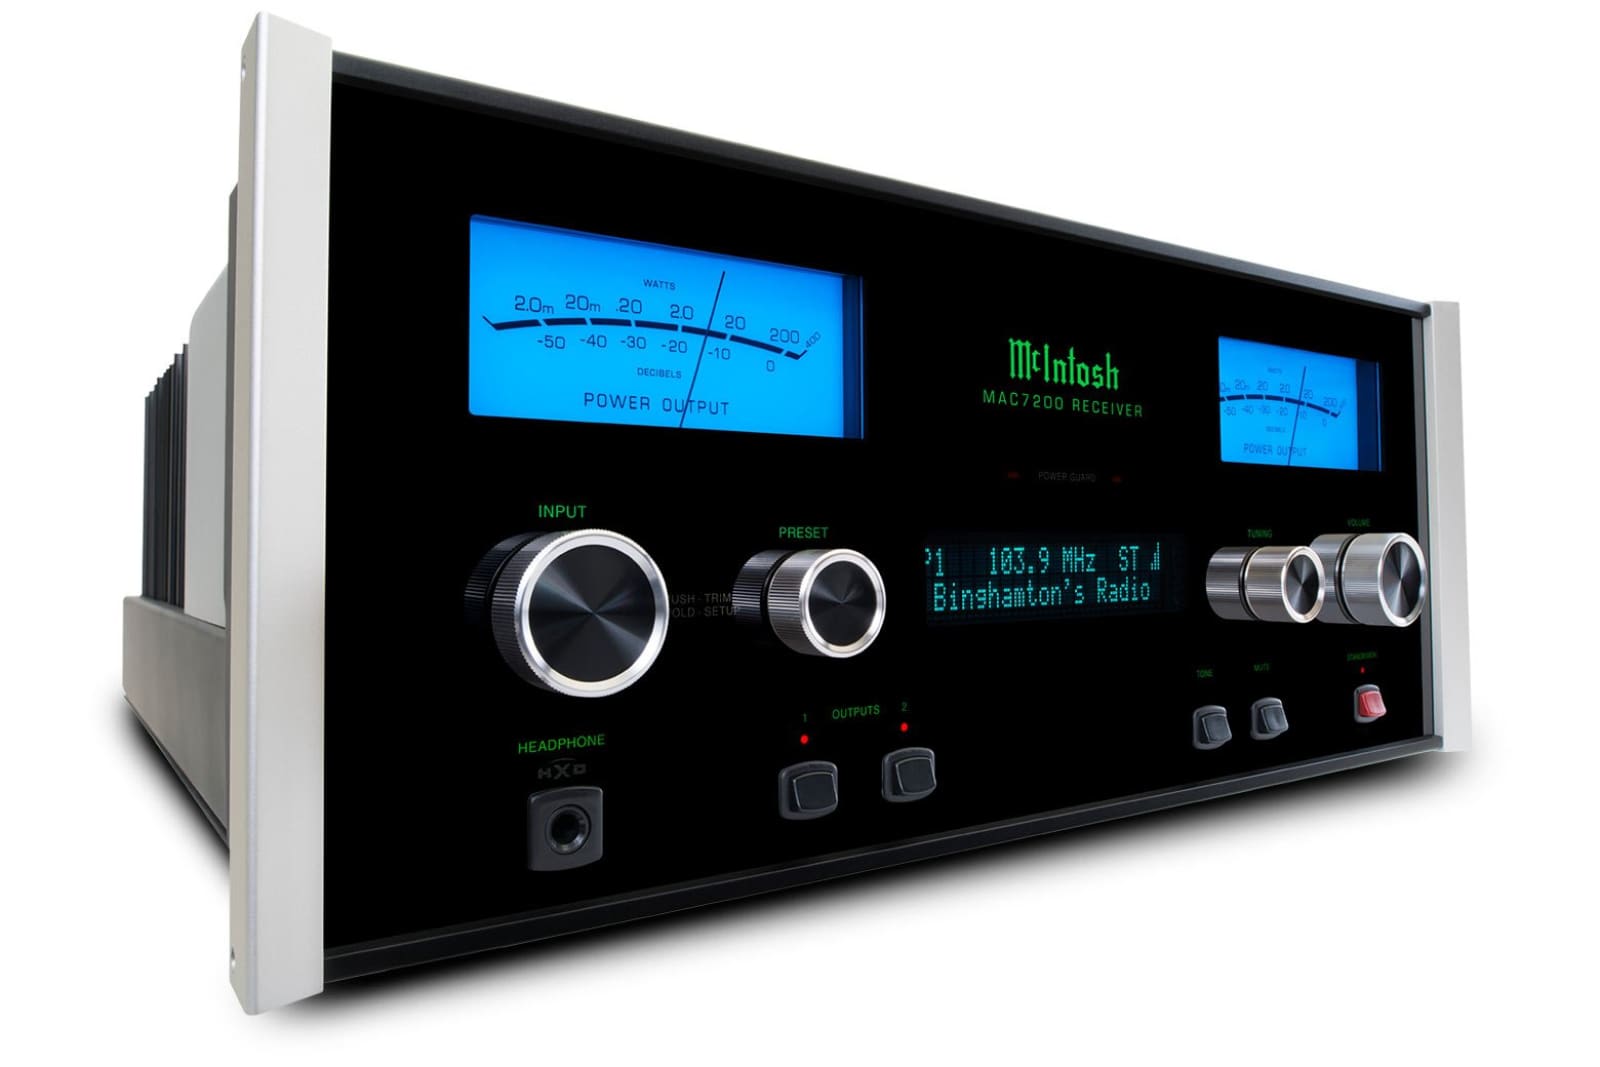 Mcintosh Mac7200 Receiver And Dac Integrated Amplifier